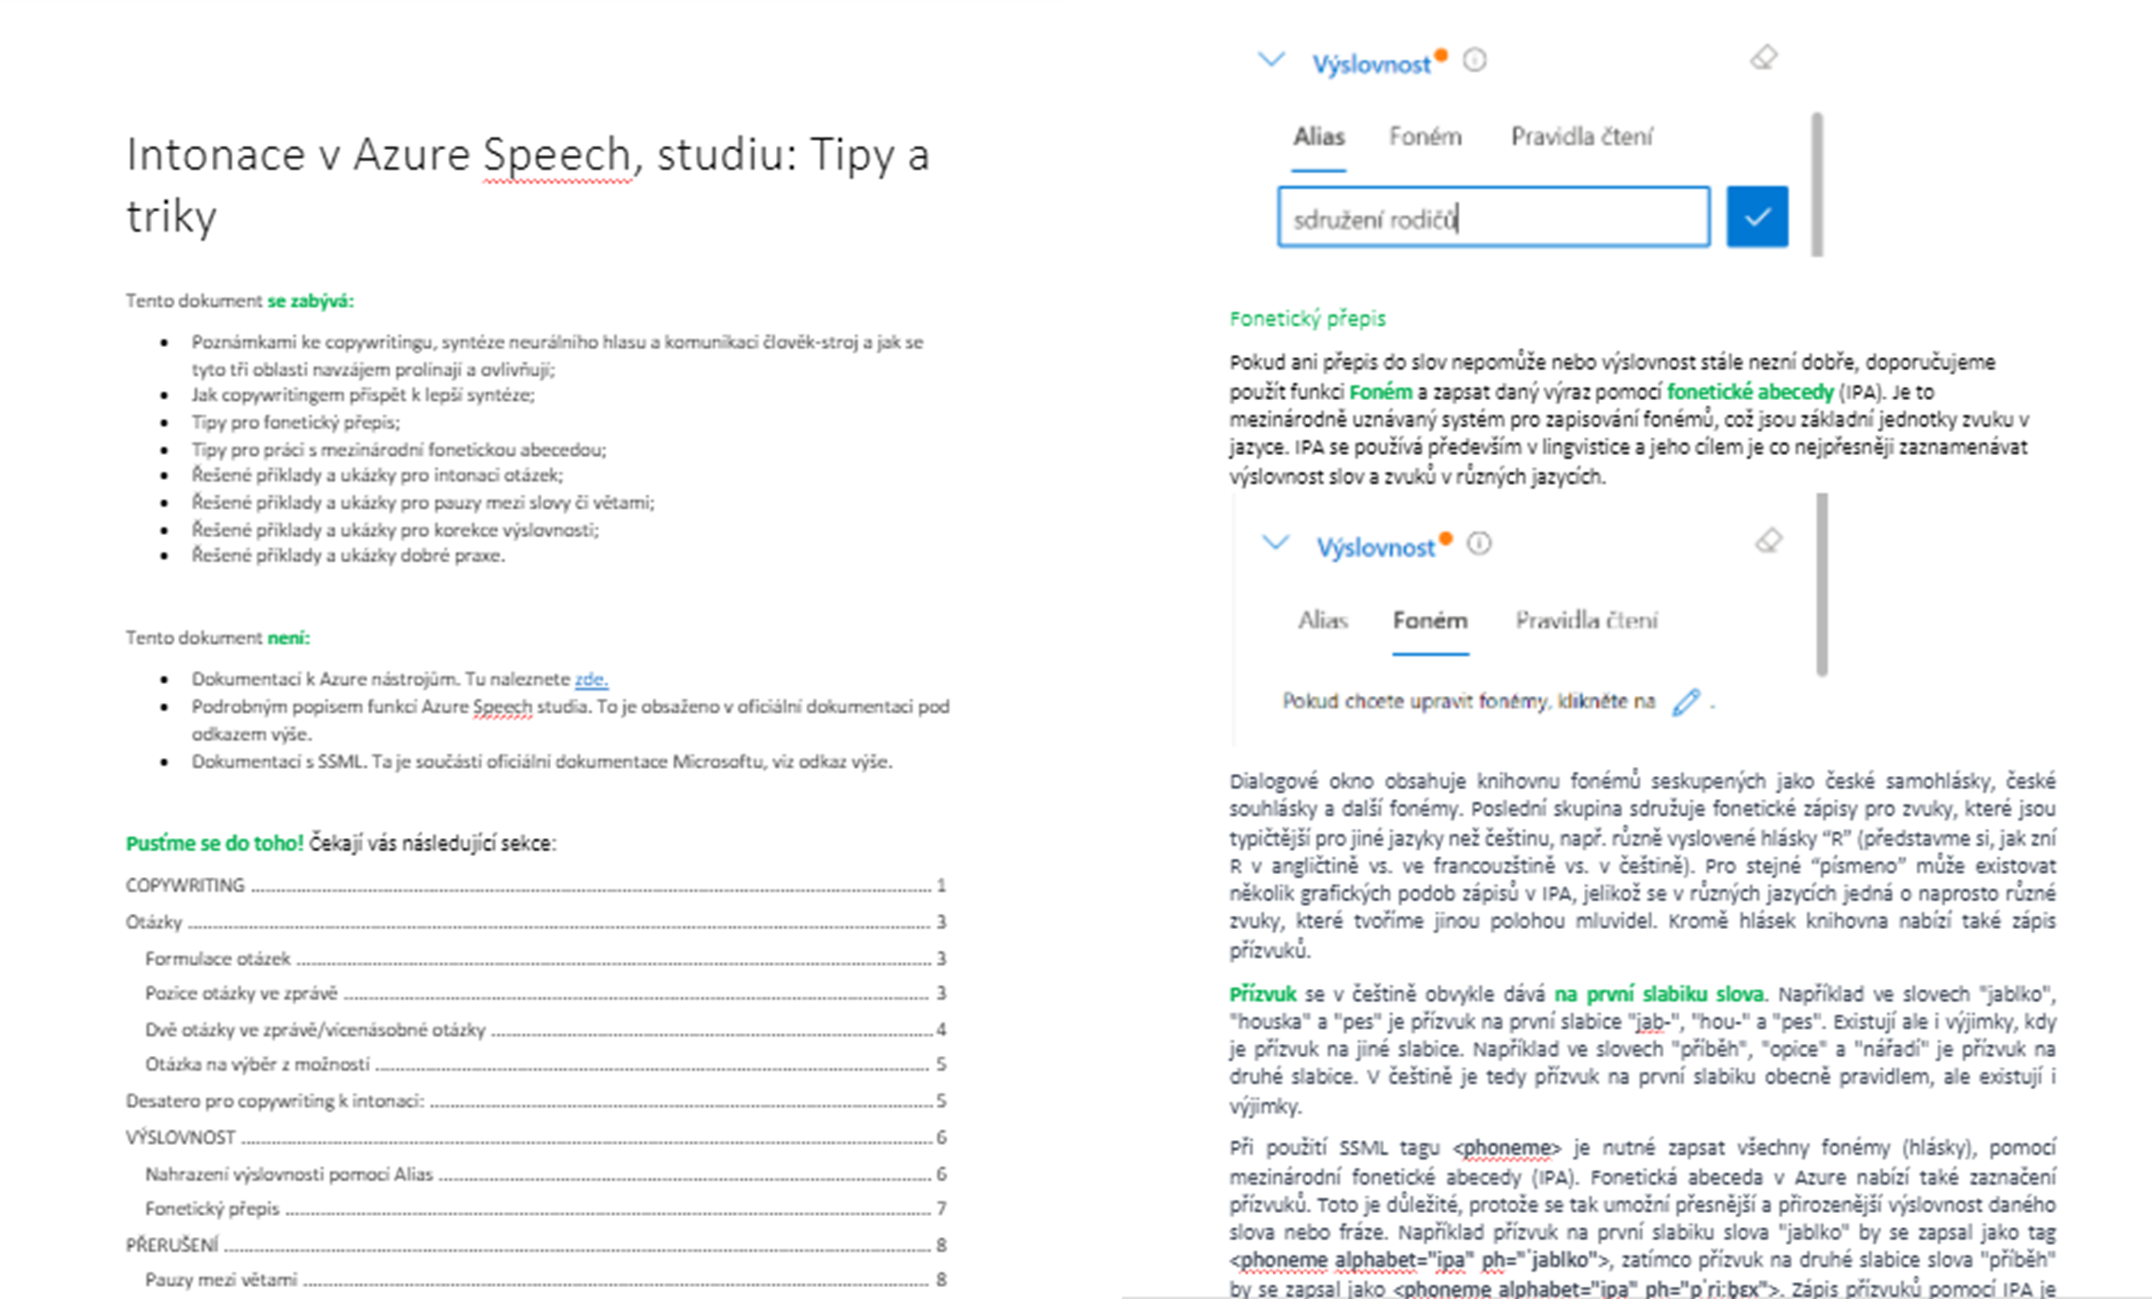 Our manual on Azure Speech created with the help of ChatGPT